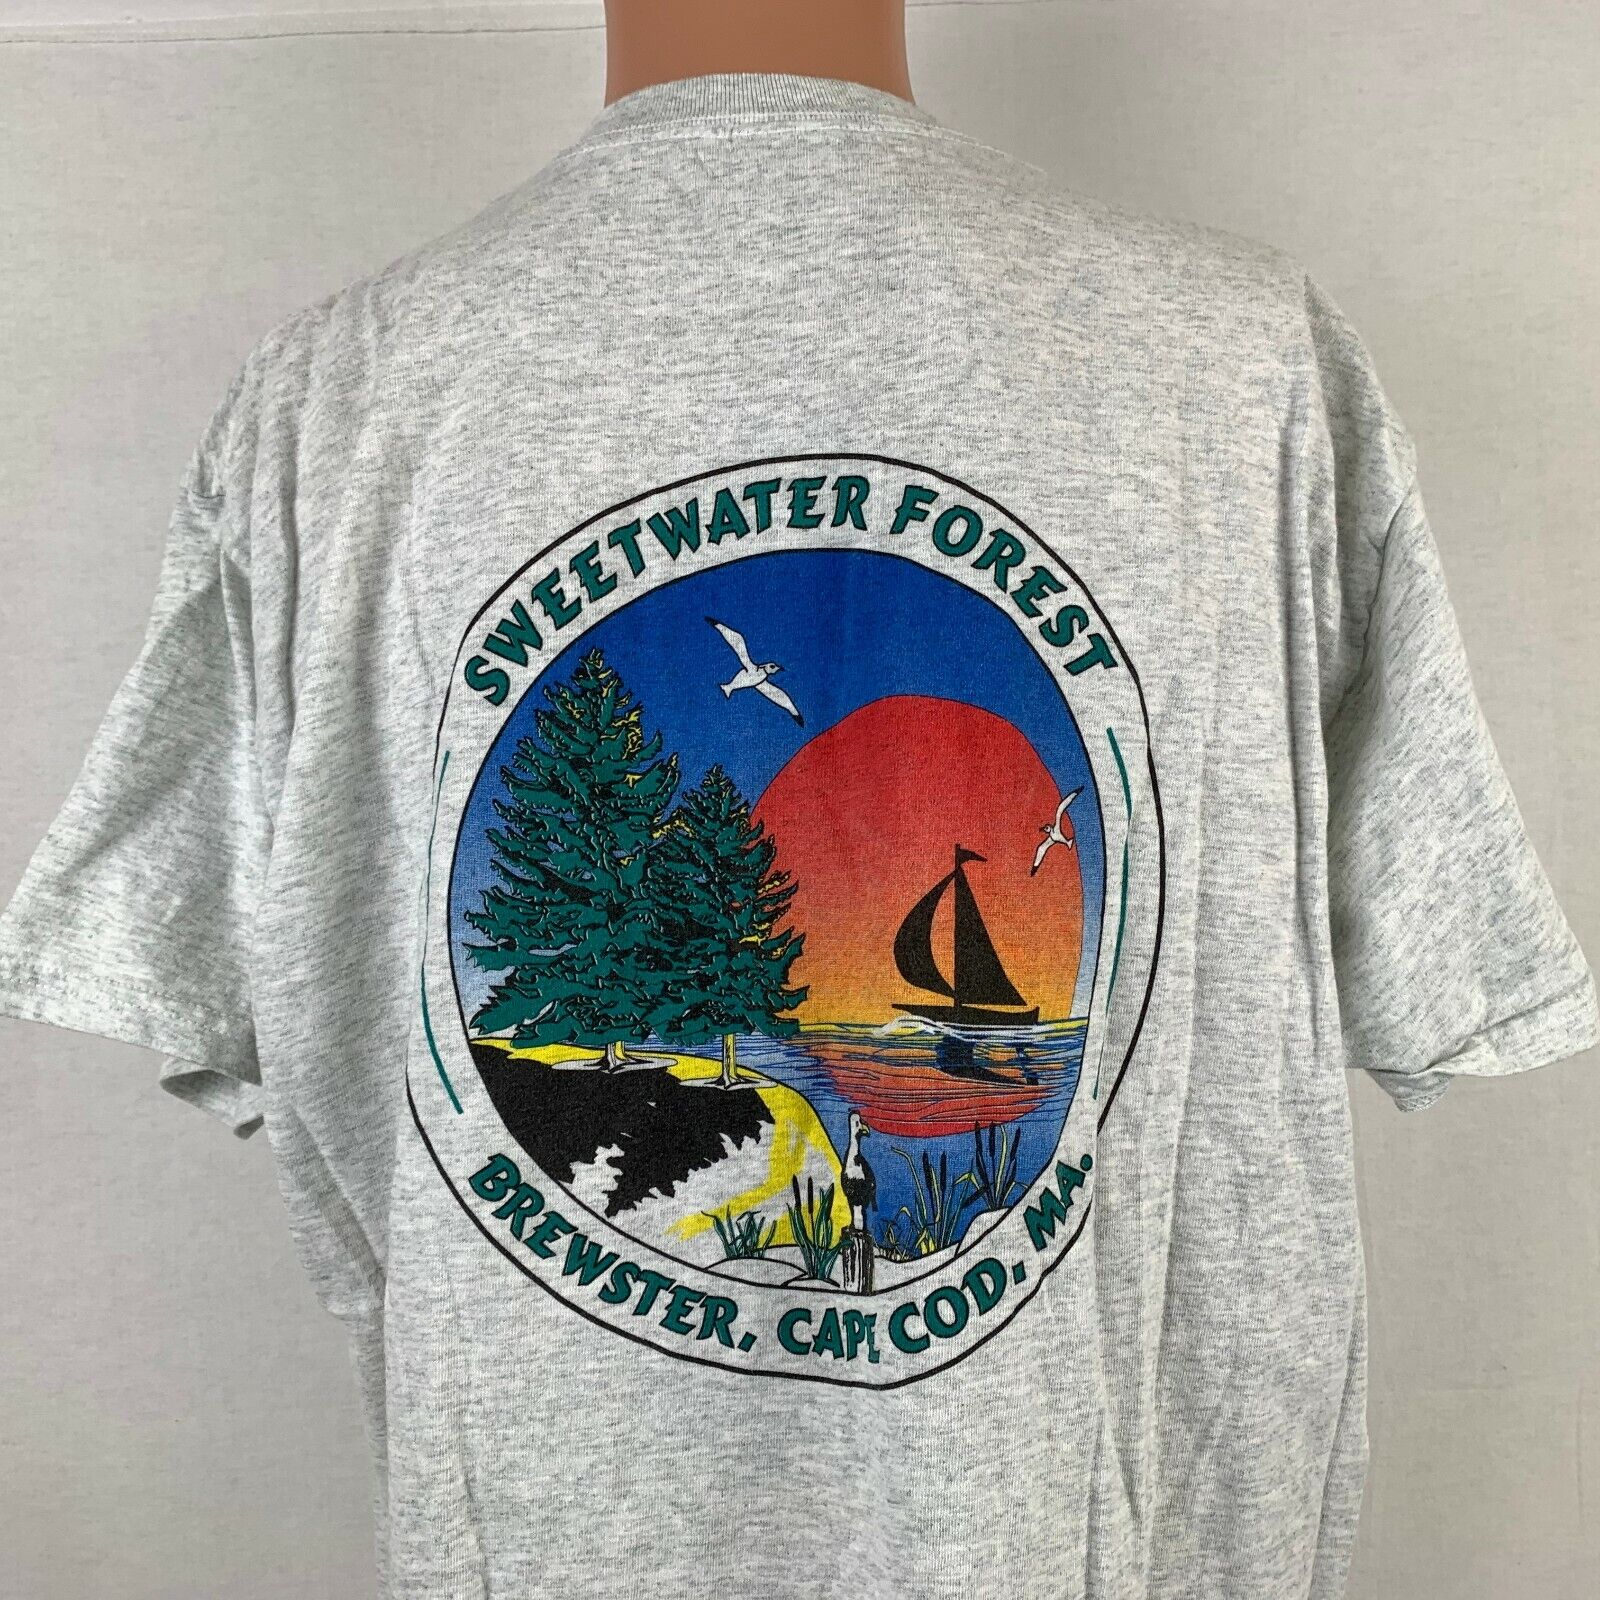 Sweetwater Forest Family Campground Brewster Cape Cod MA T Shirt Vtg 90s XL 